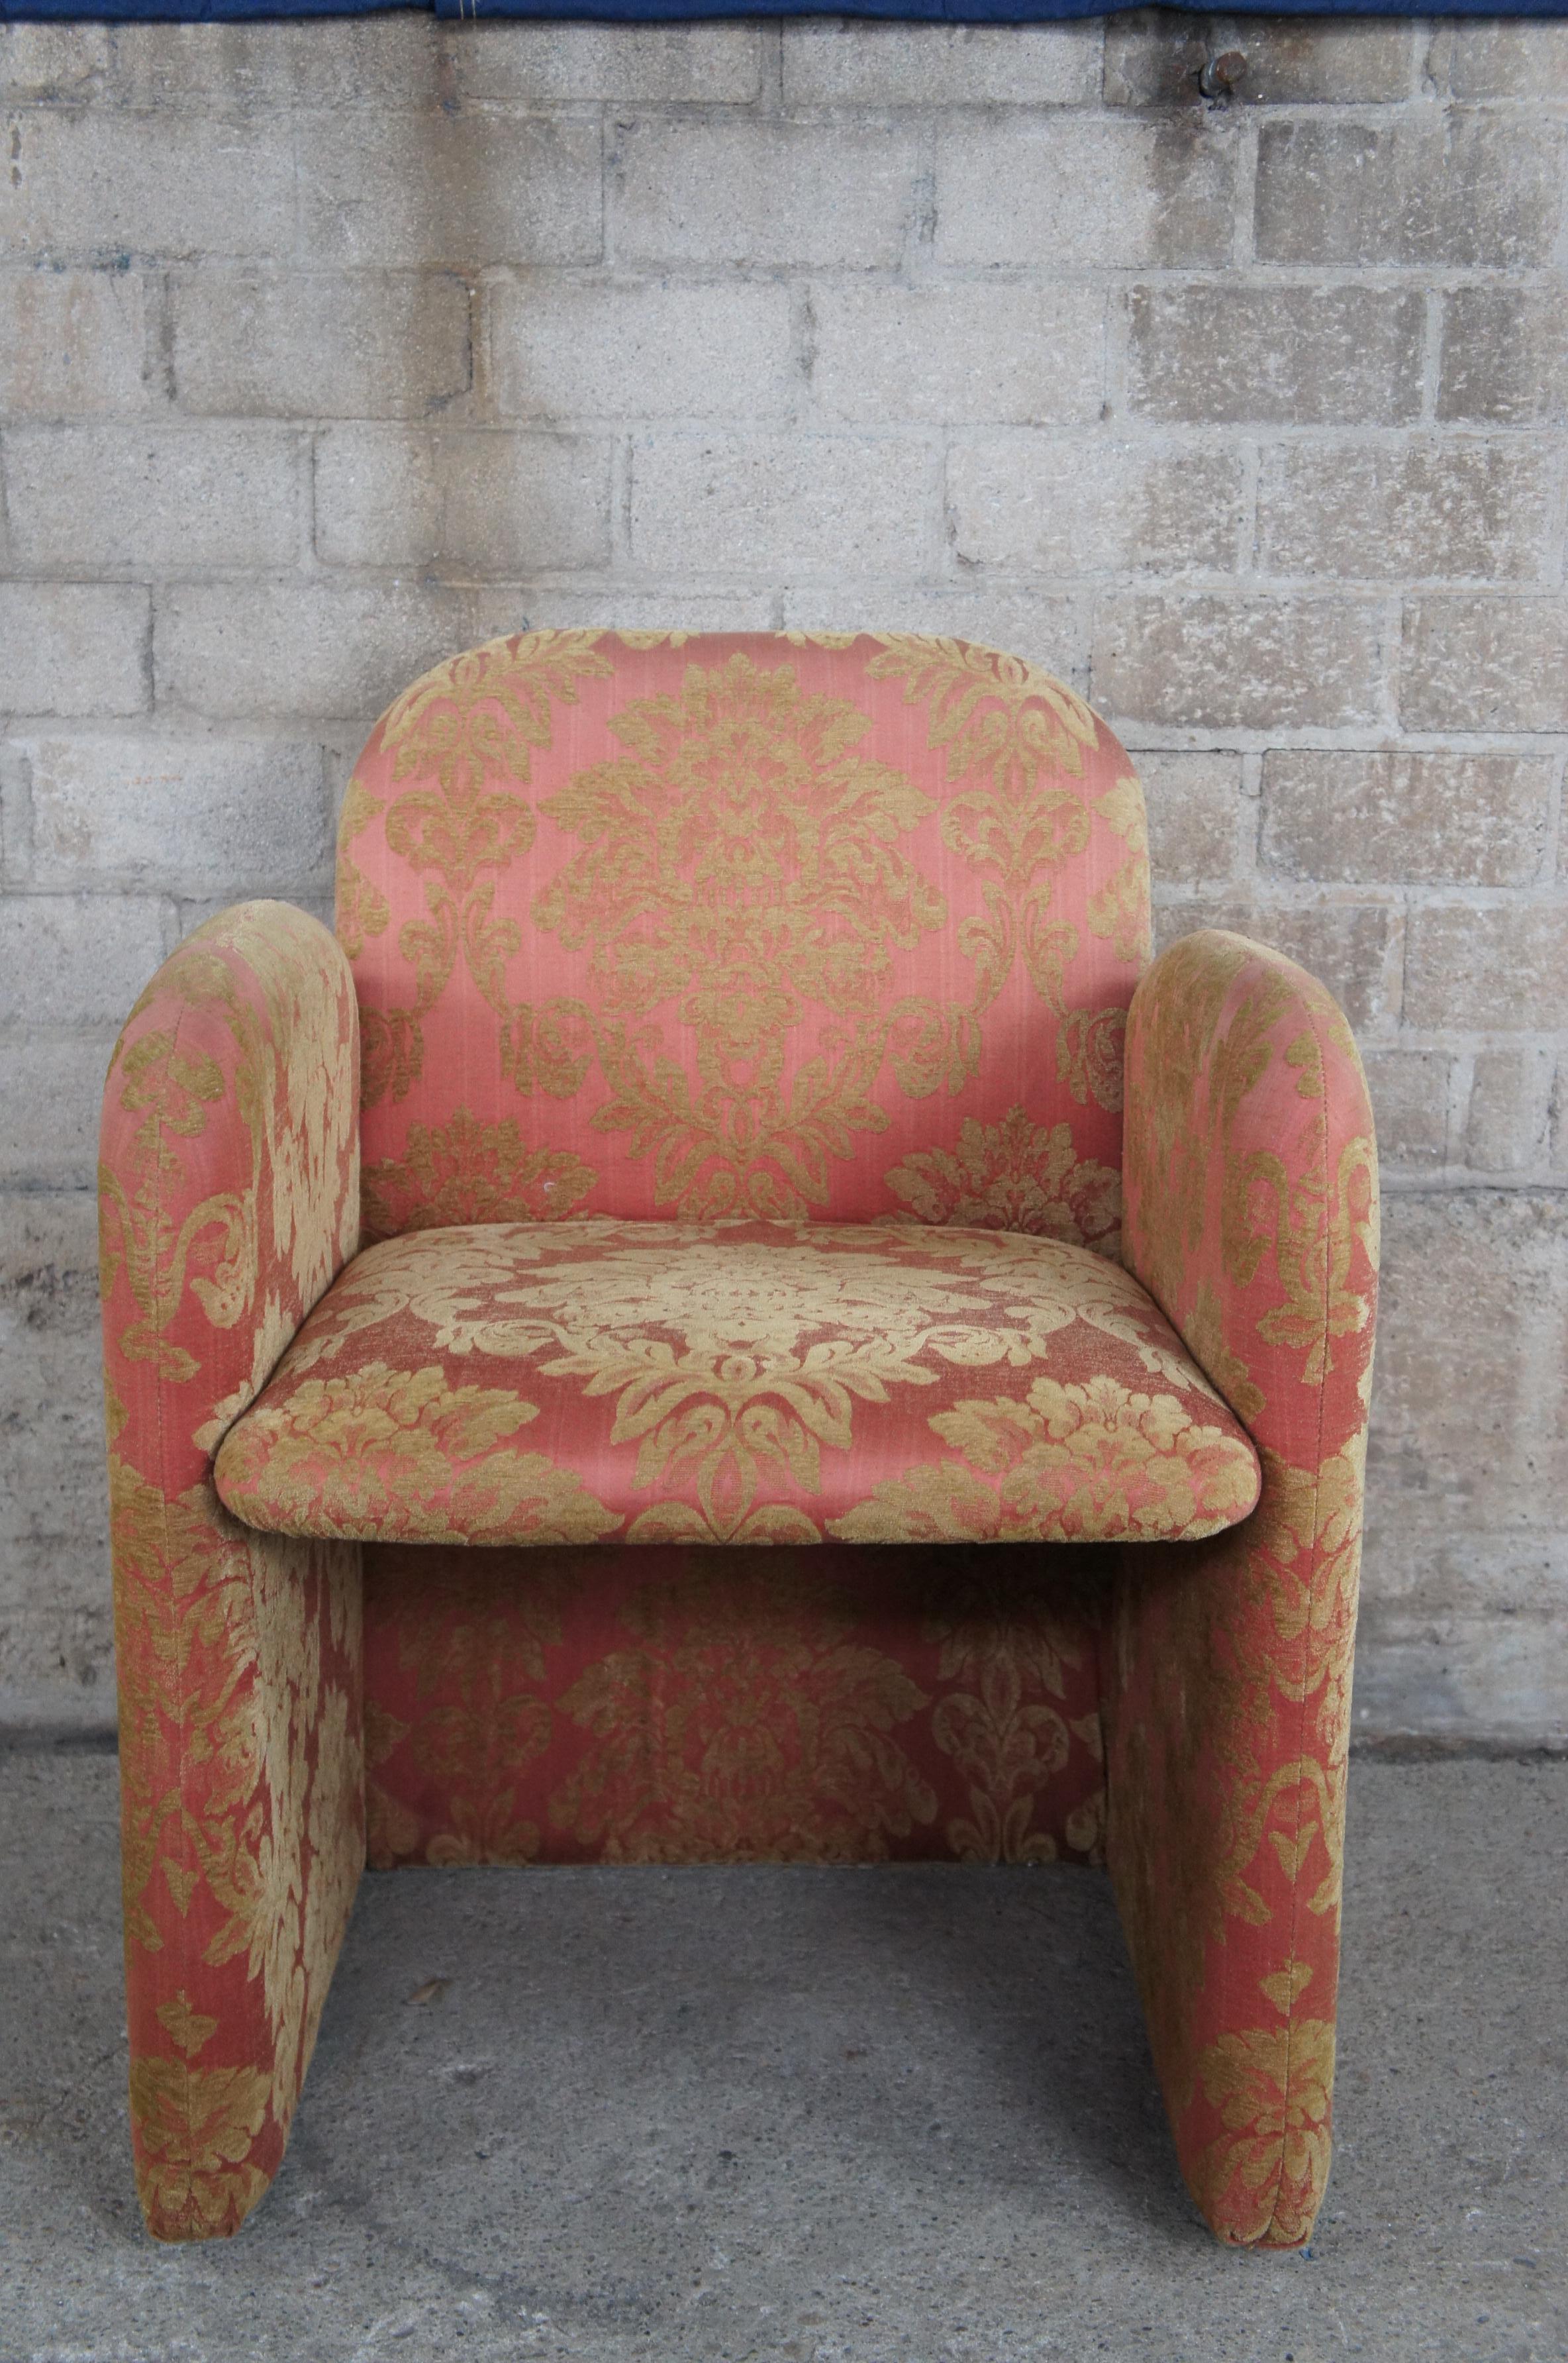 Upholstery 4 Post Modern Chiclet Dining or Game Arm Chairs on Wheels Brocade Fabric Cubic